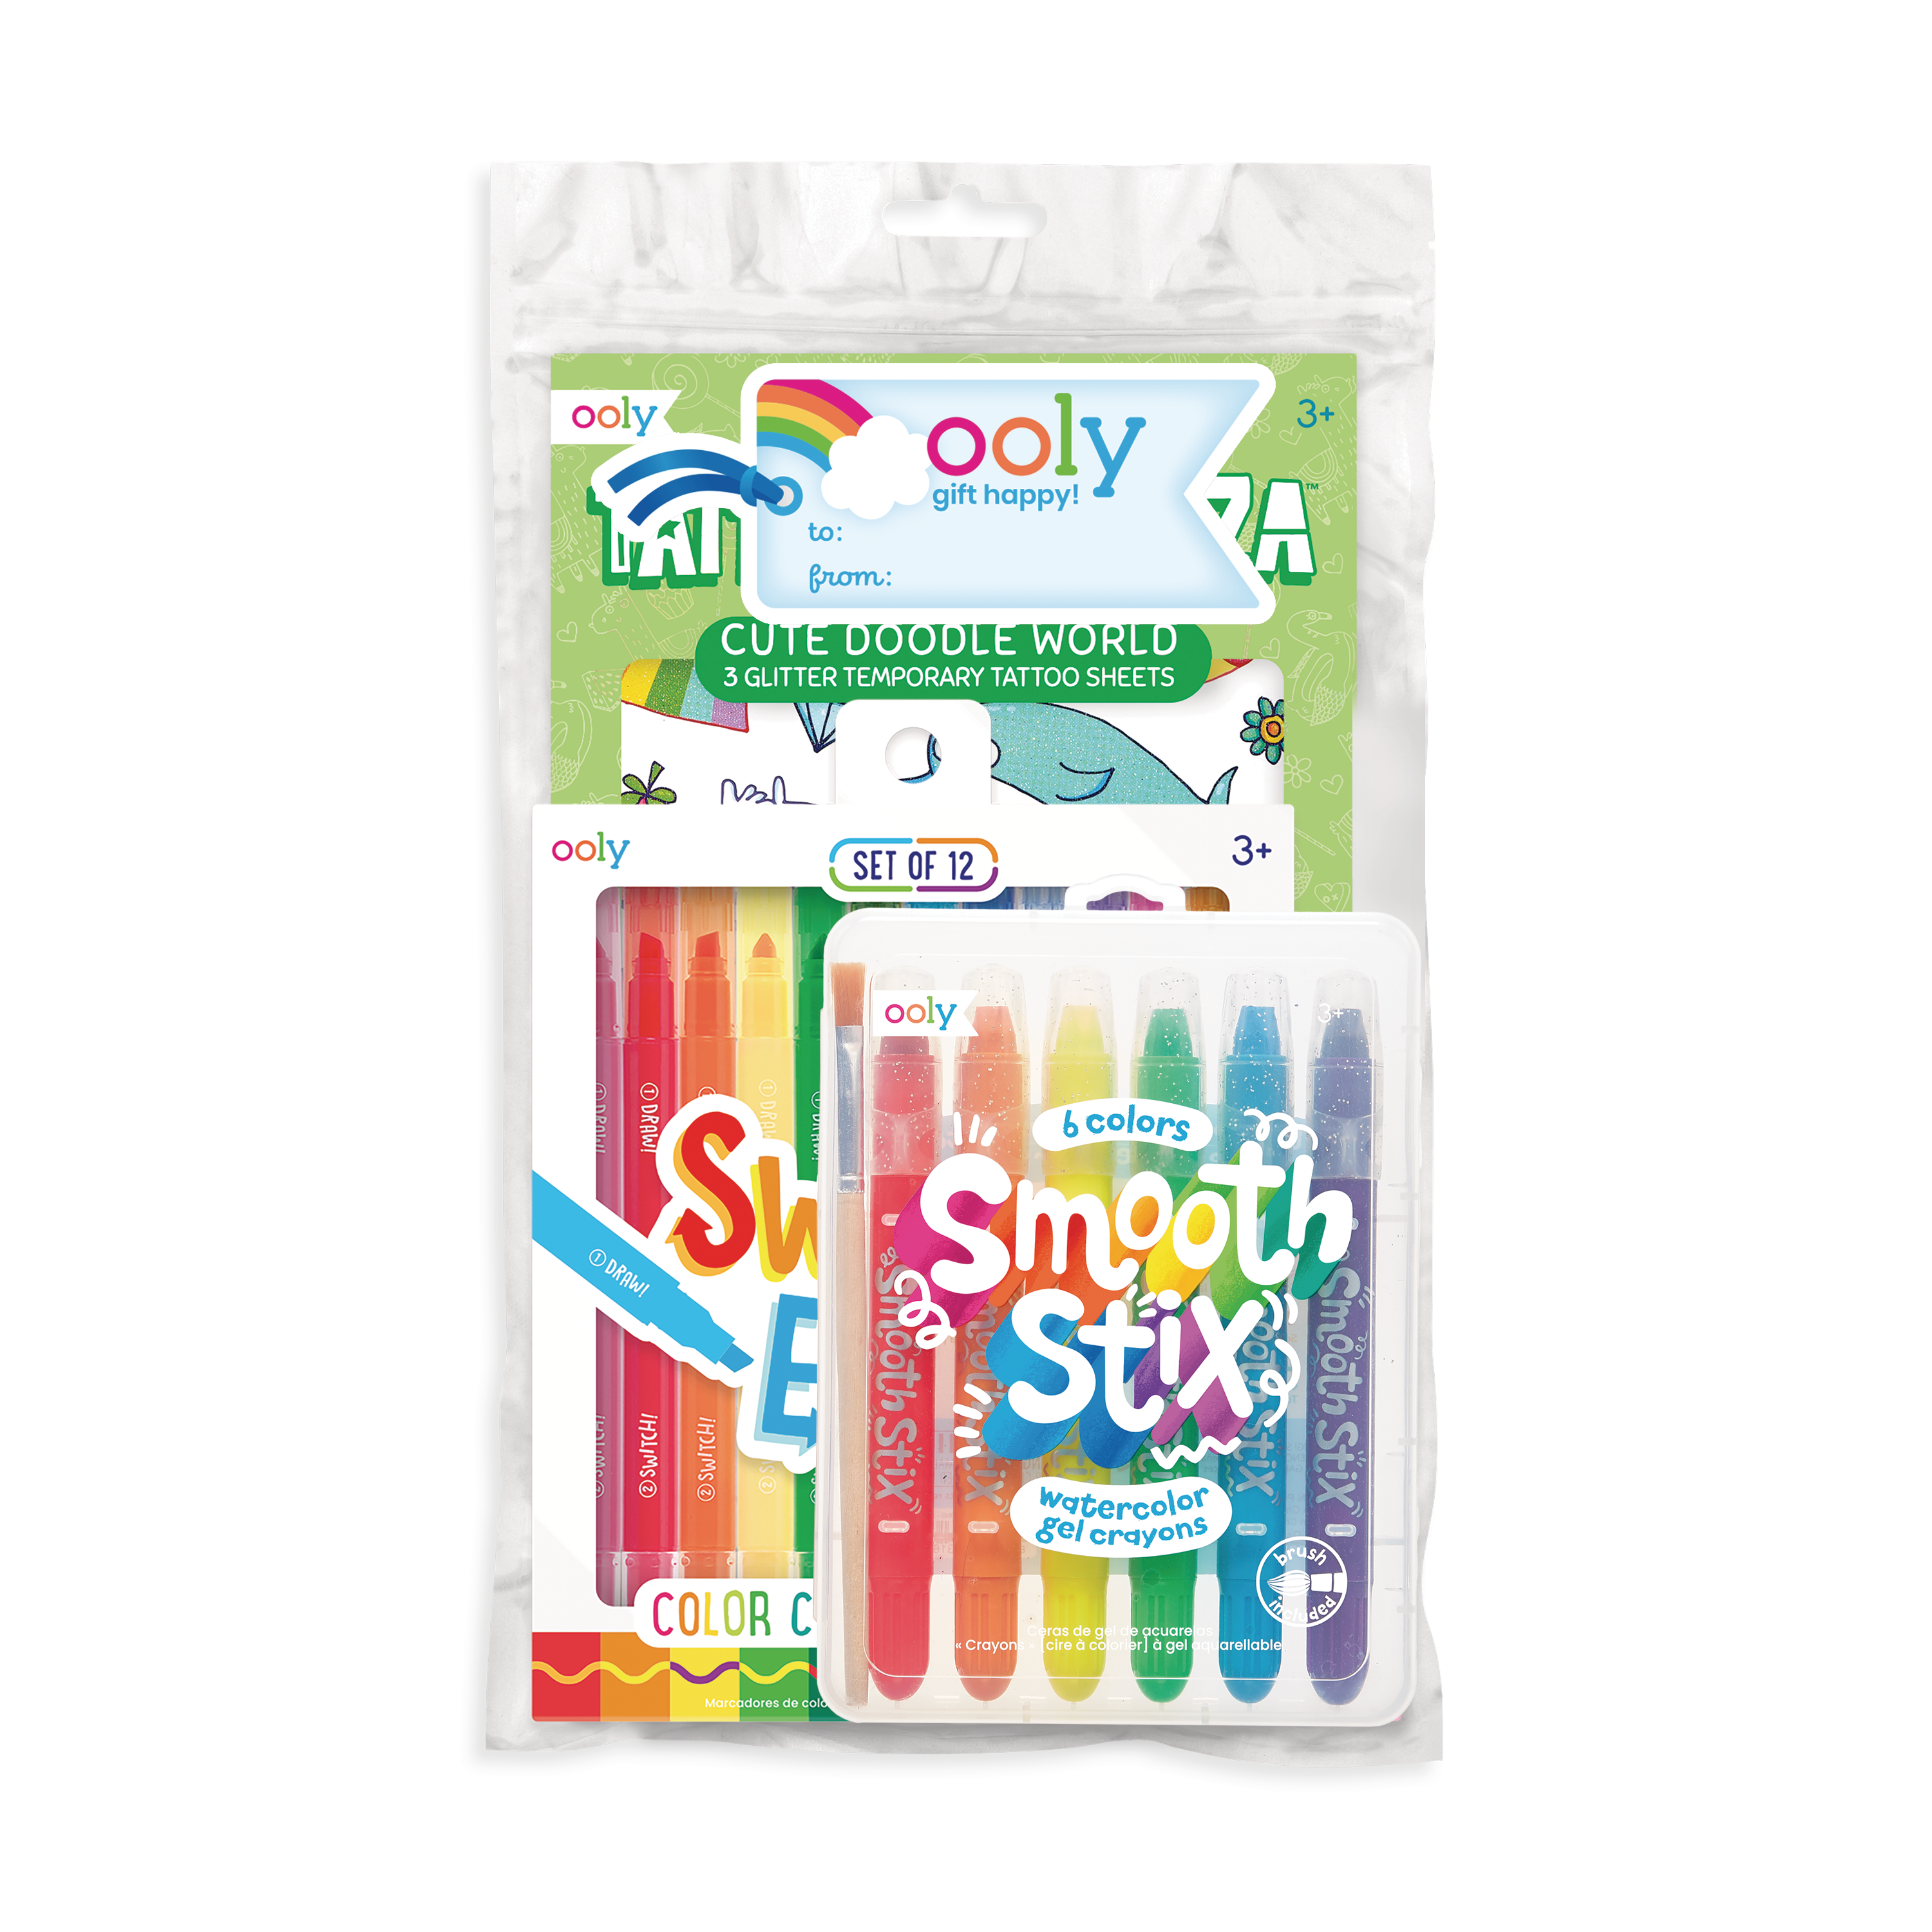 OOLY Colorful Worlds Works Happy Pack in gift pack